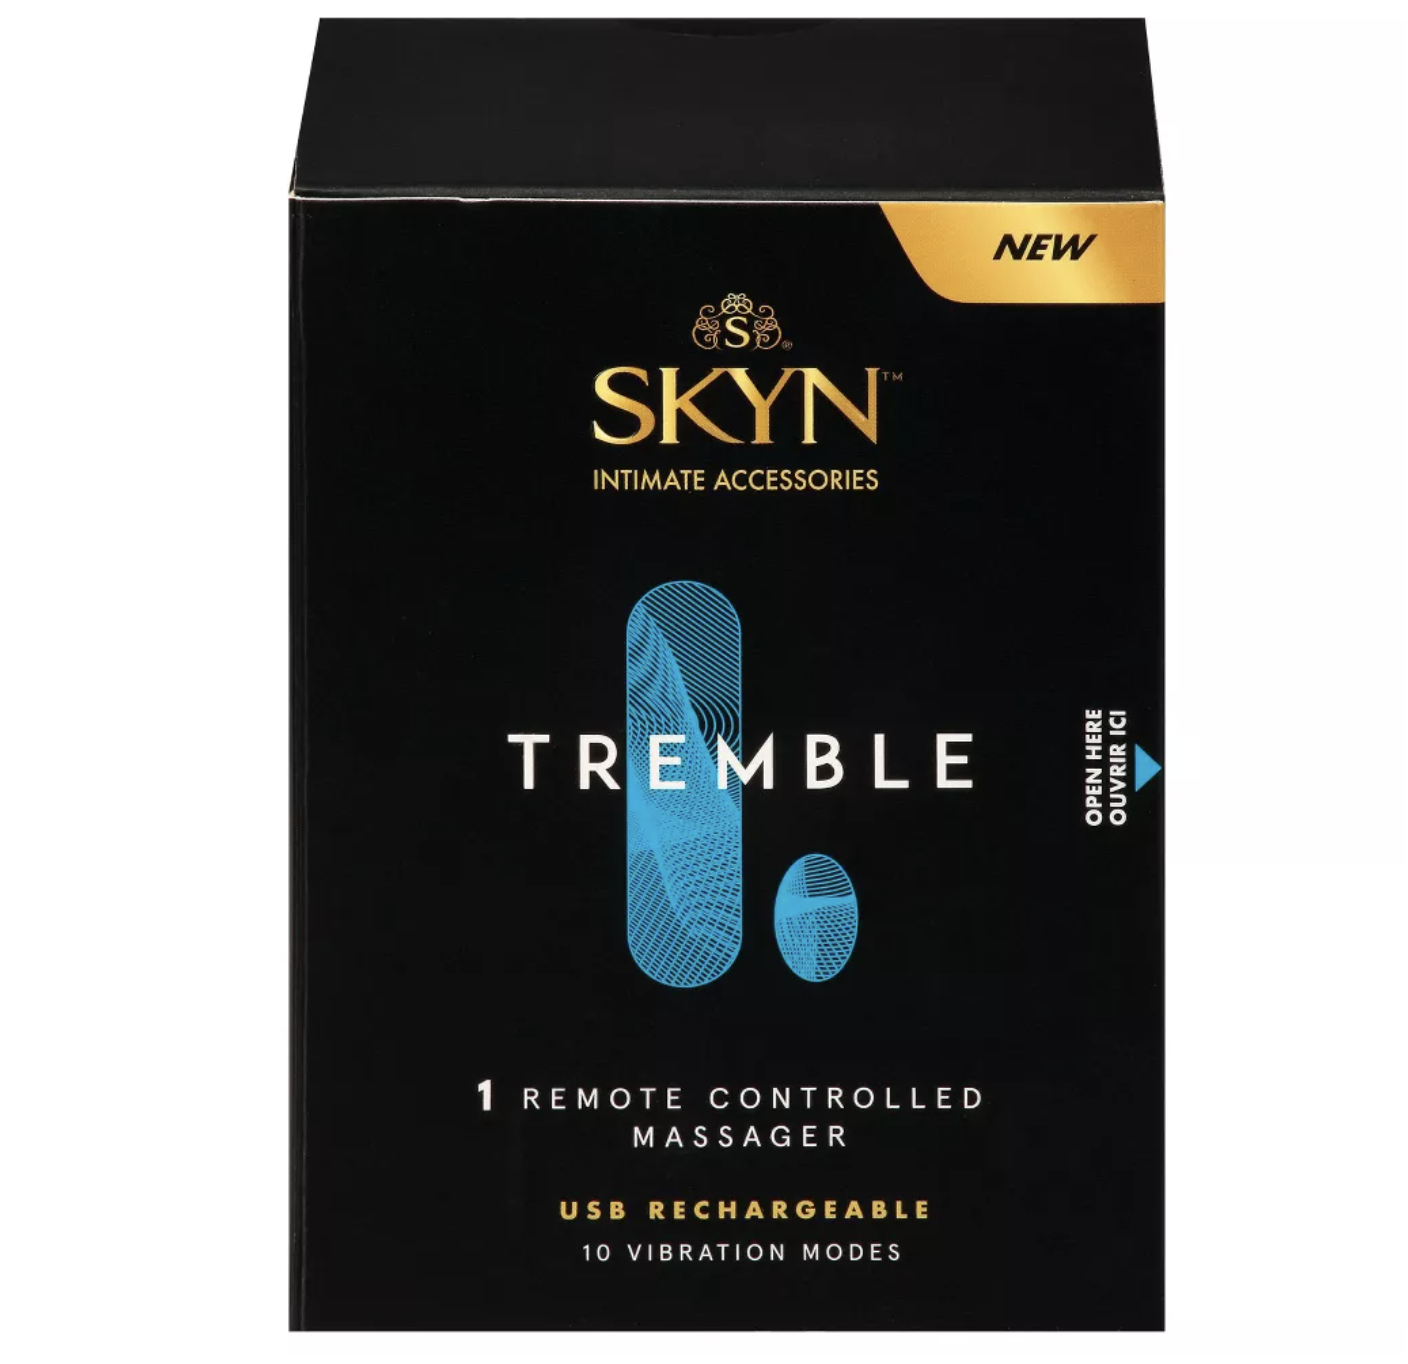 Product image of Skyn Tremble remote controlled massager